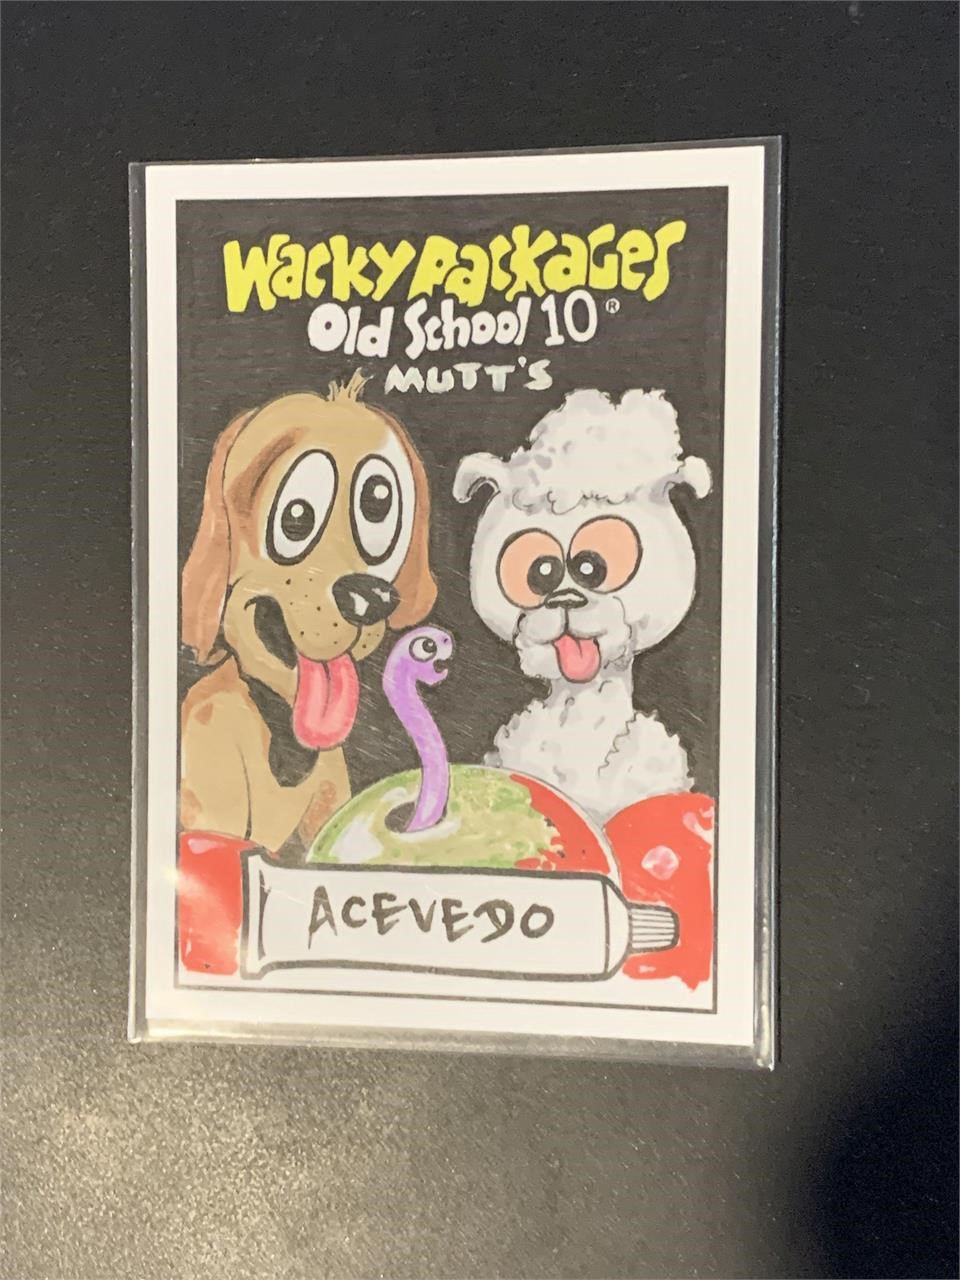 2021 Topps Wacky Packages OLDS10 Old School 10 Mut